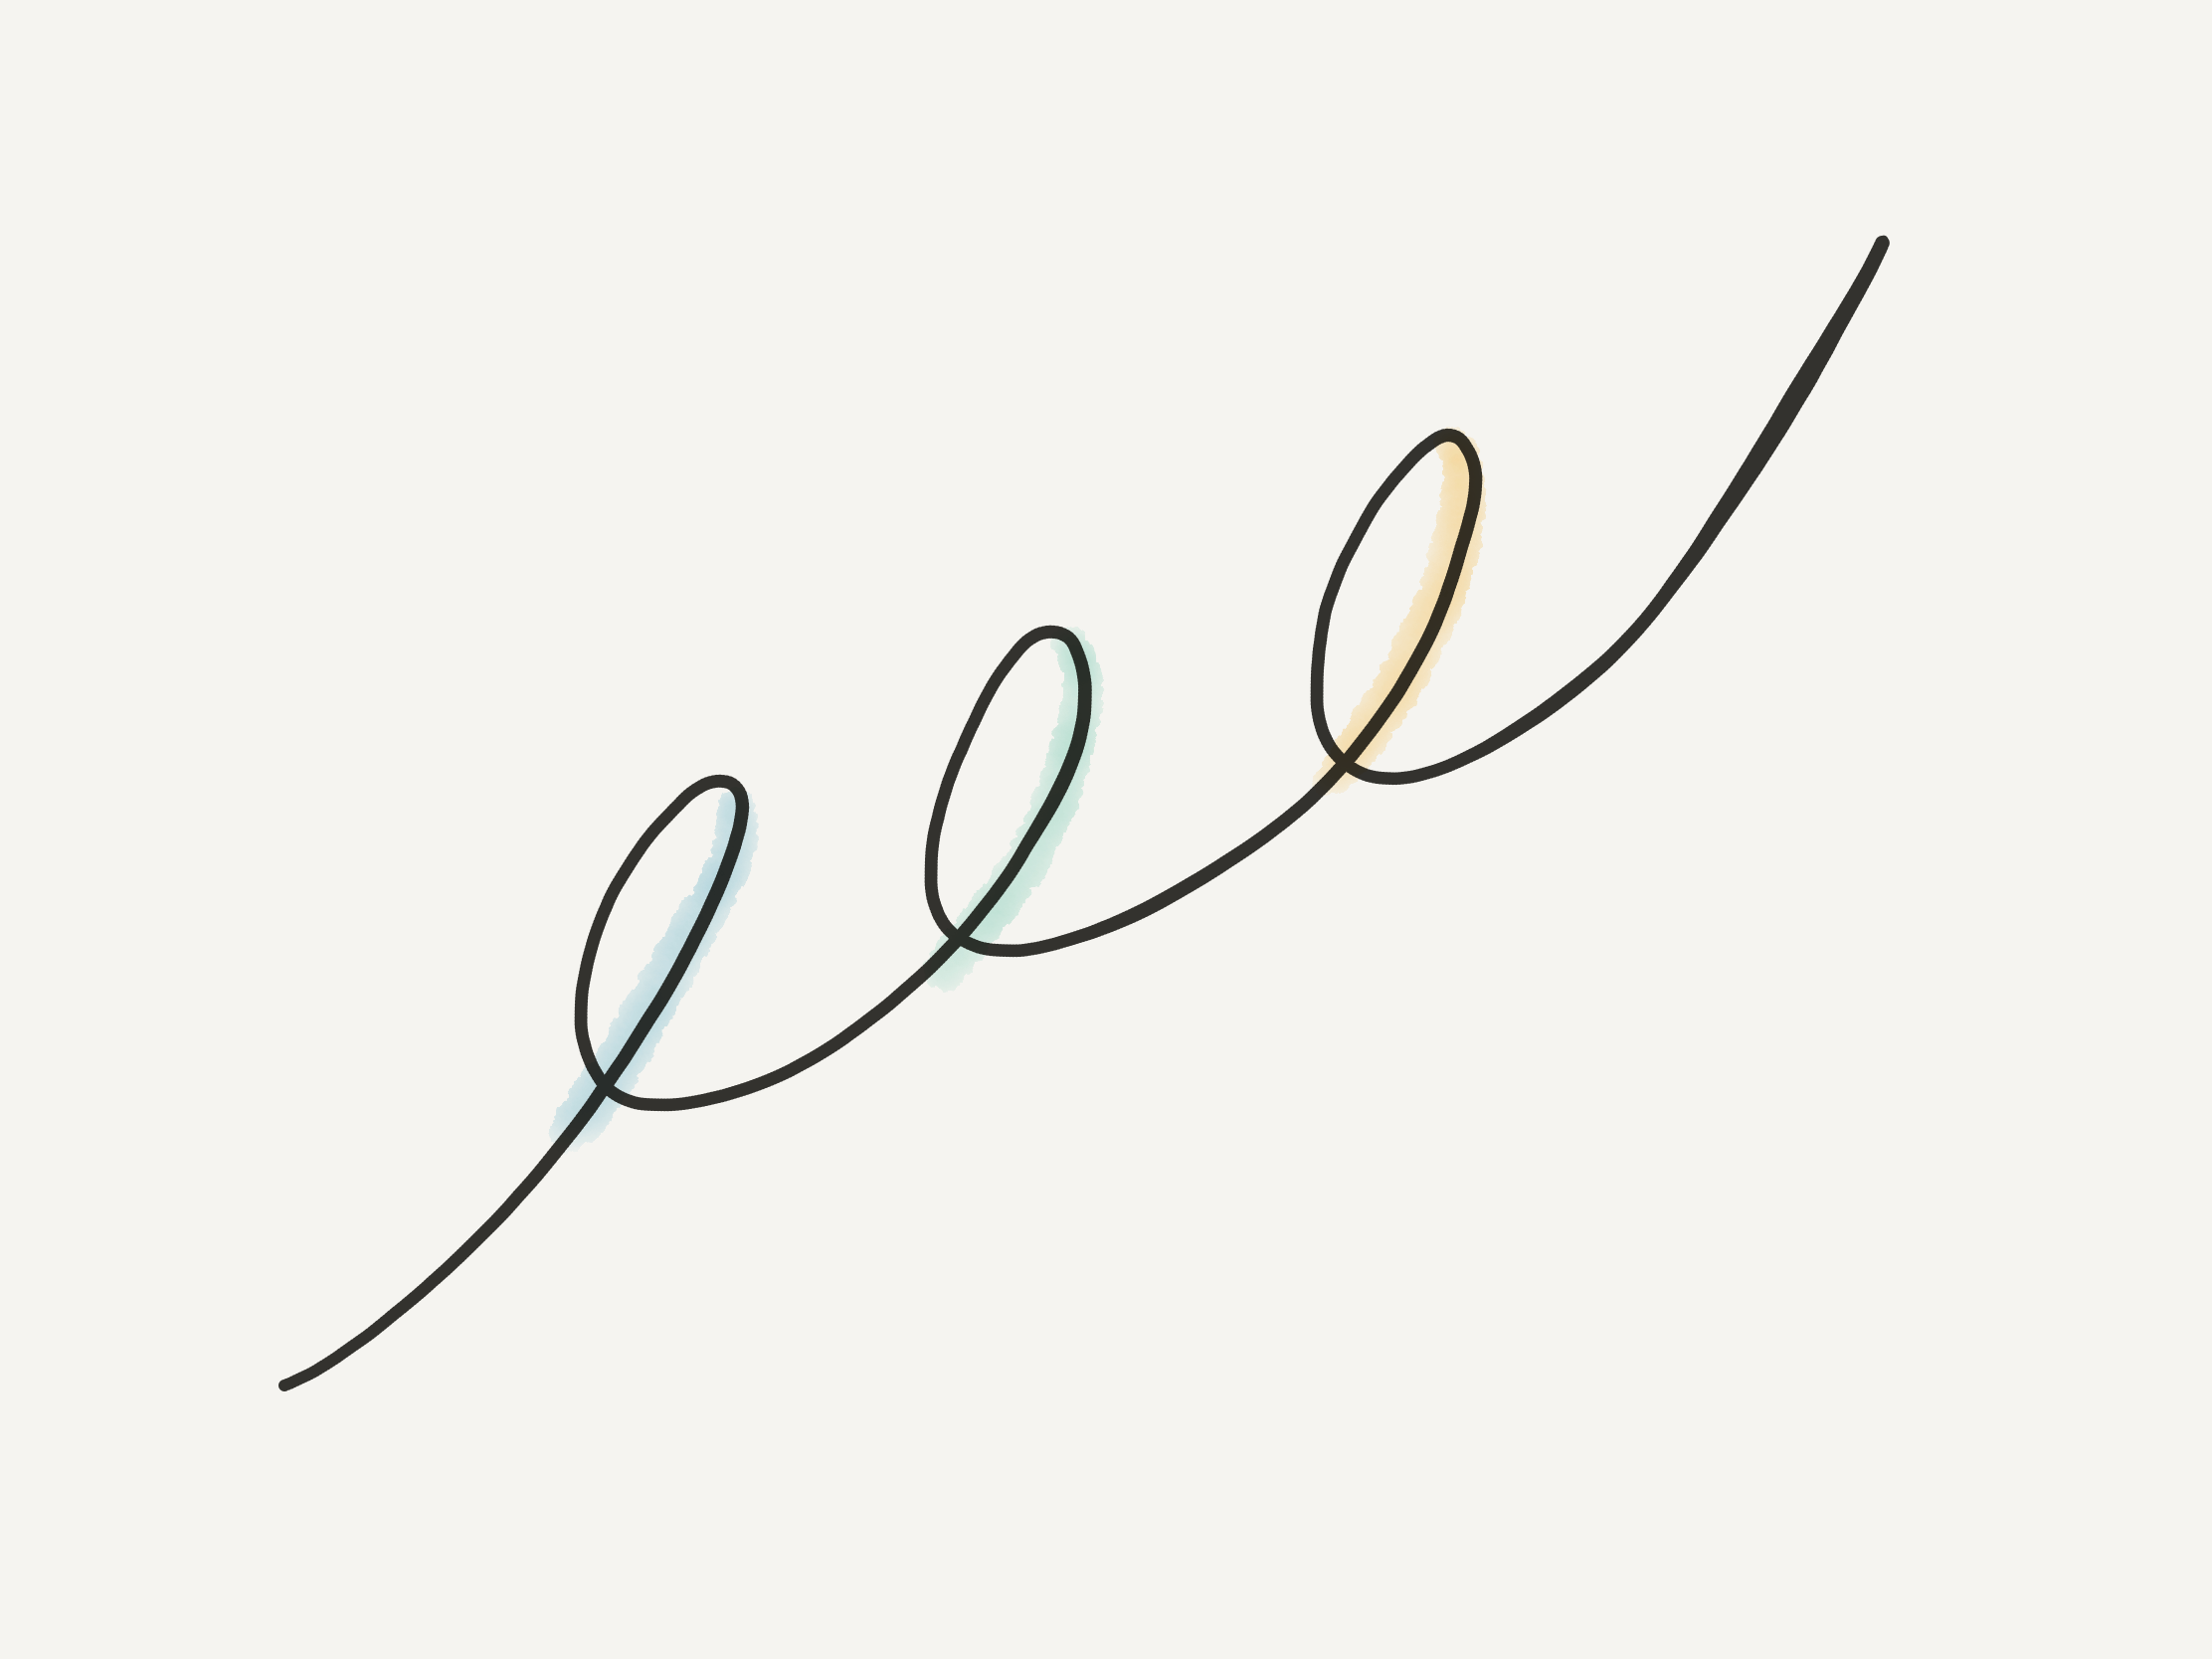 A drawing of three loops, each leading to the other, each slightly different colours